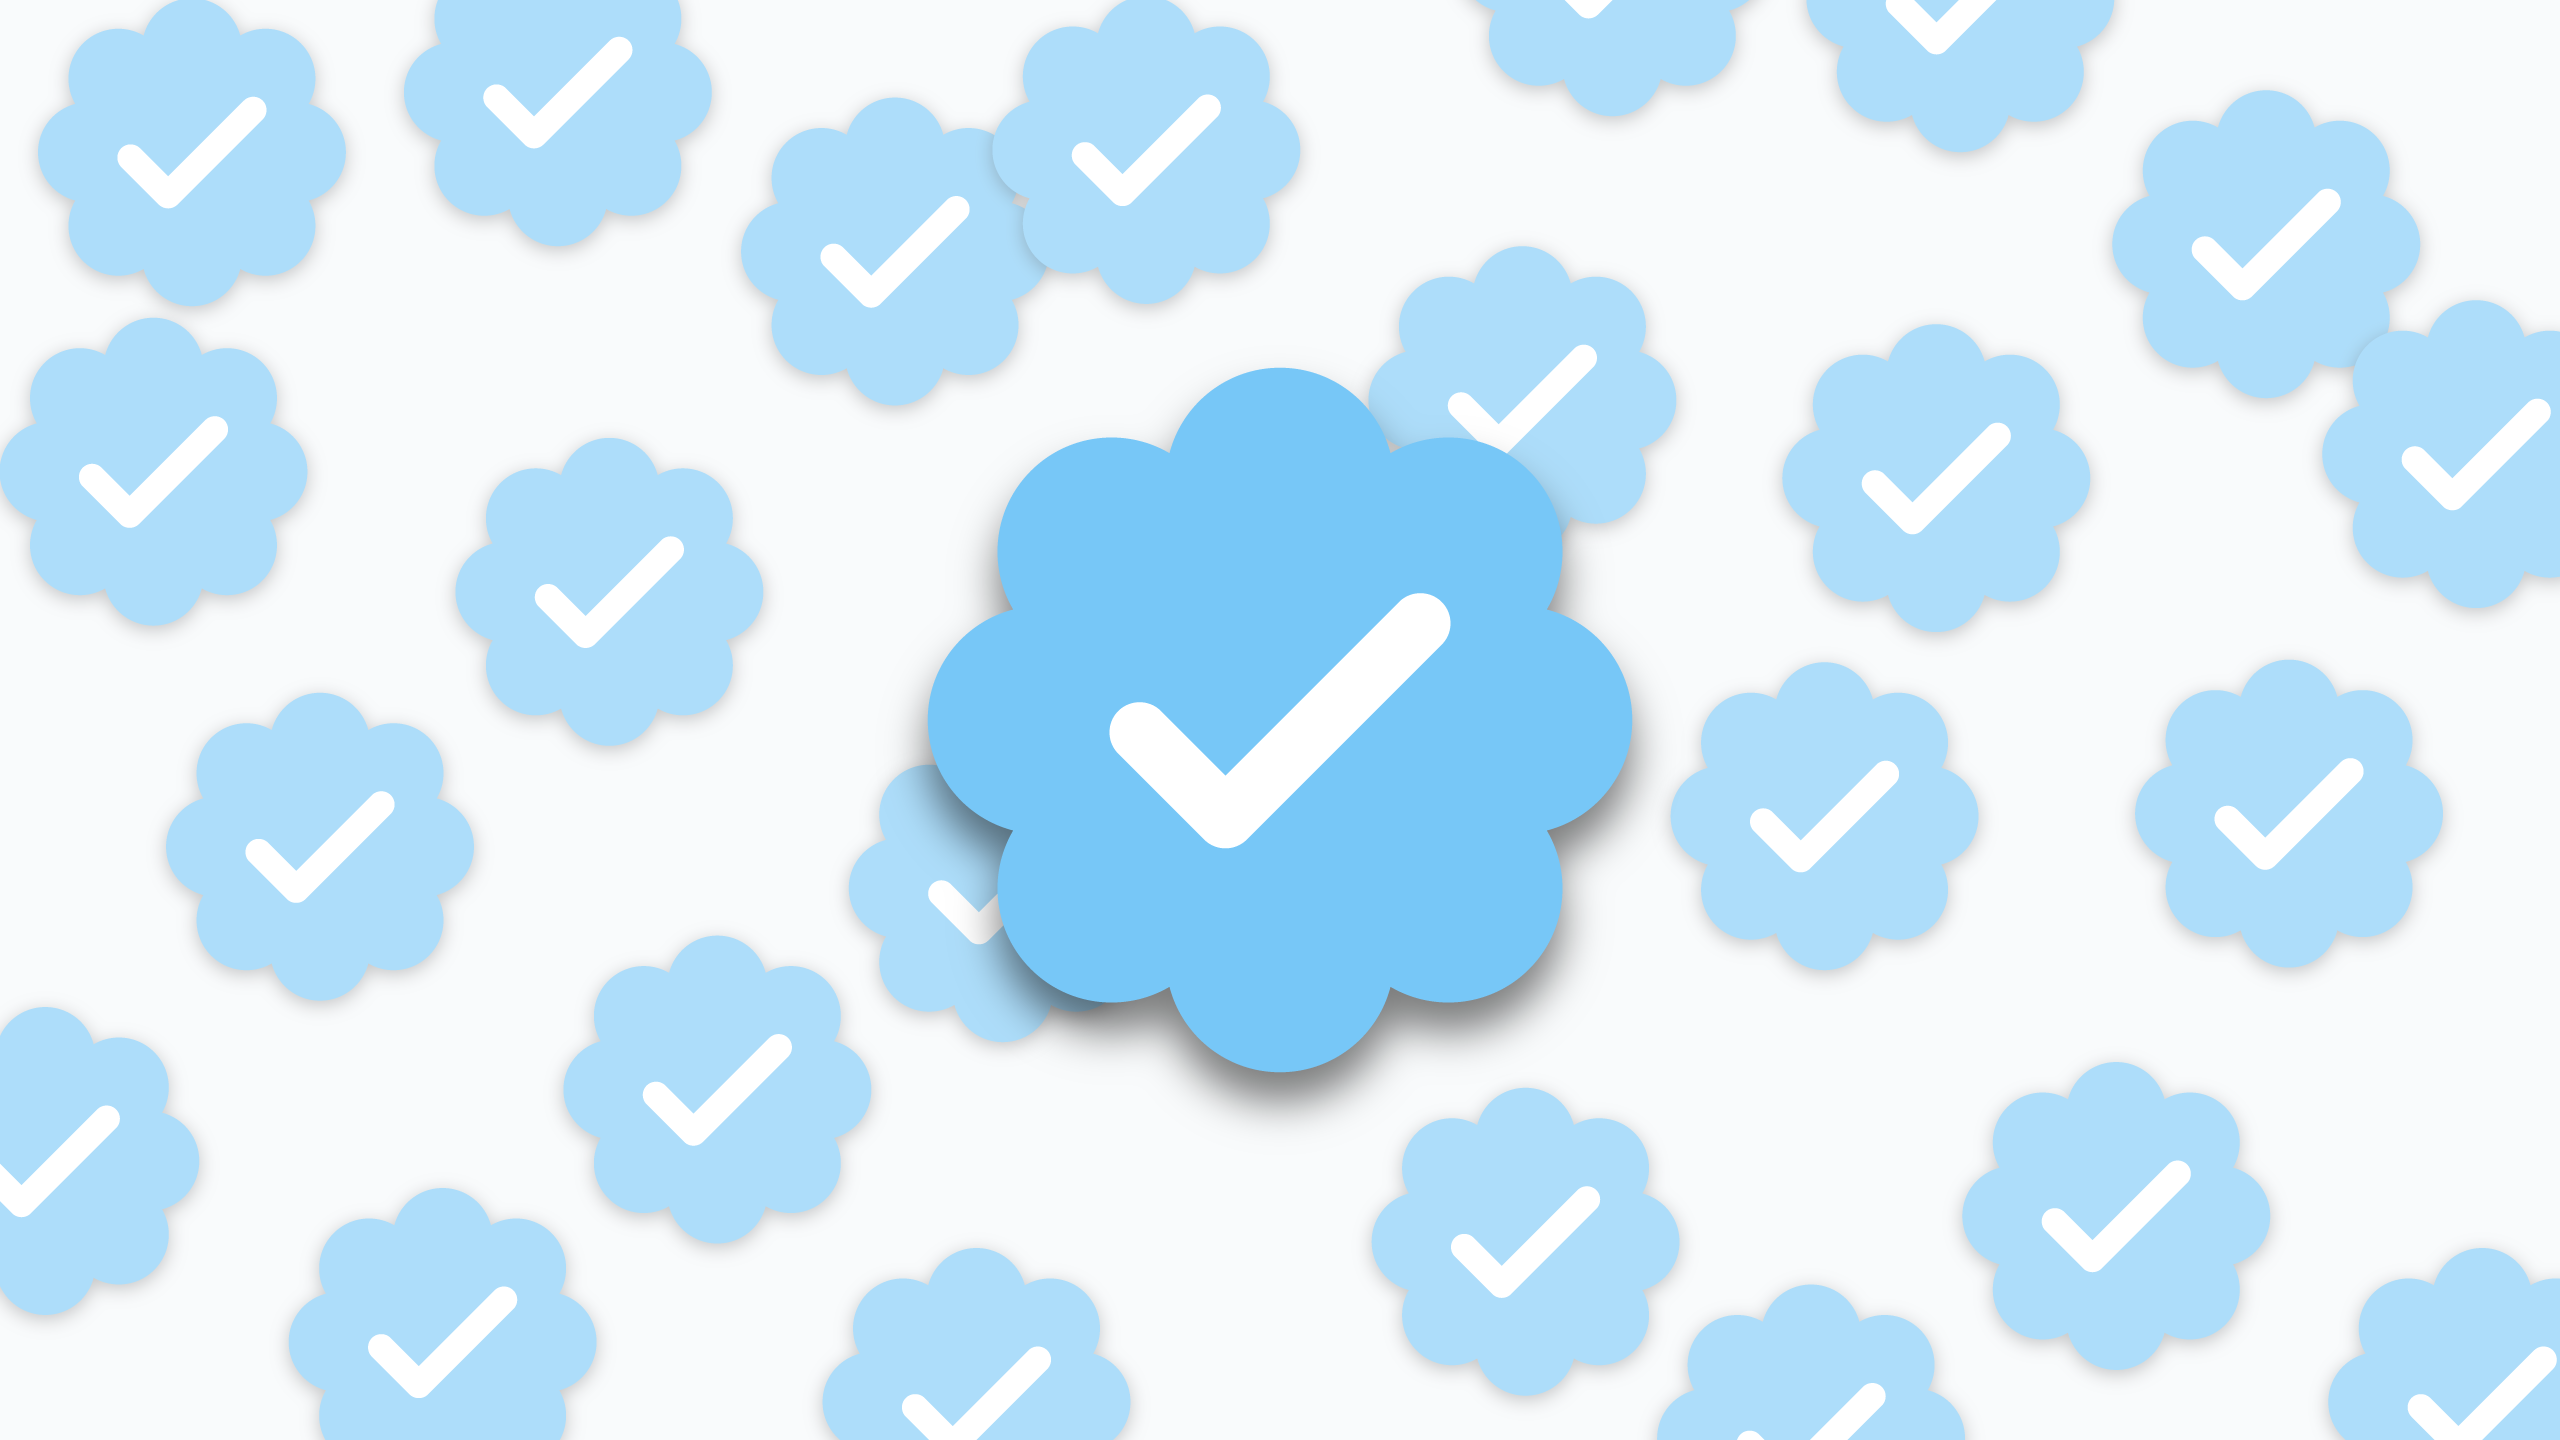 Twitter Relaunching verification / verified blue checkmark process again. Twitter will gradually rolling it out